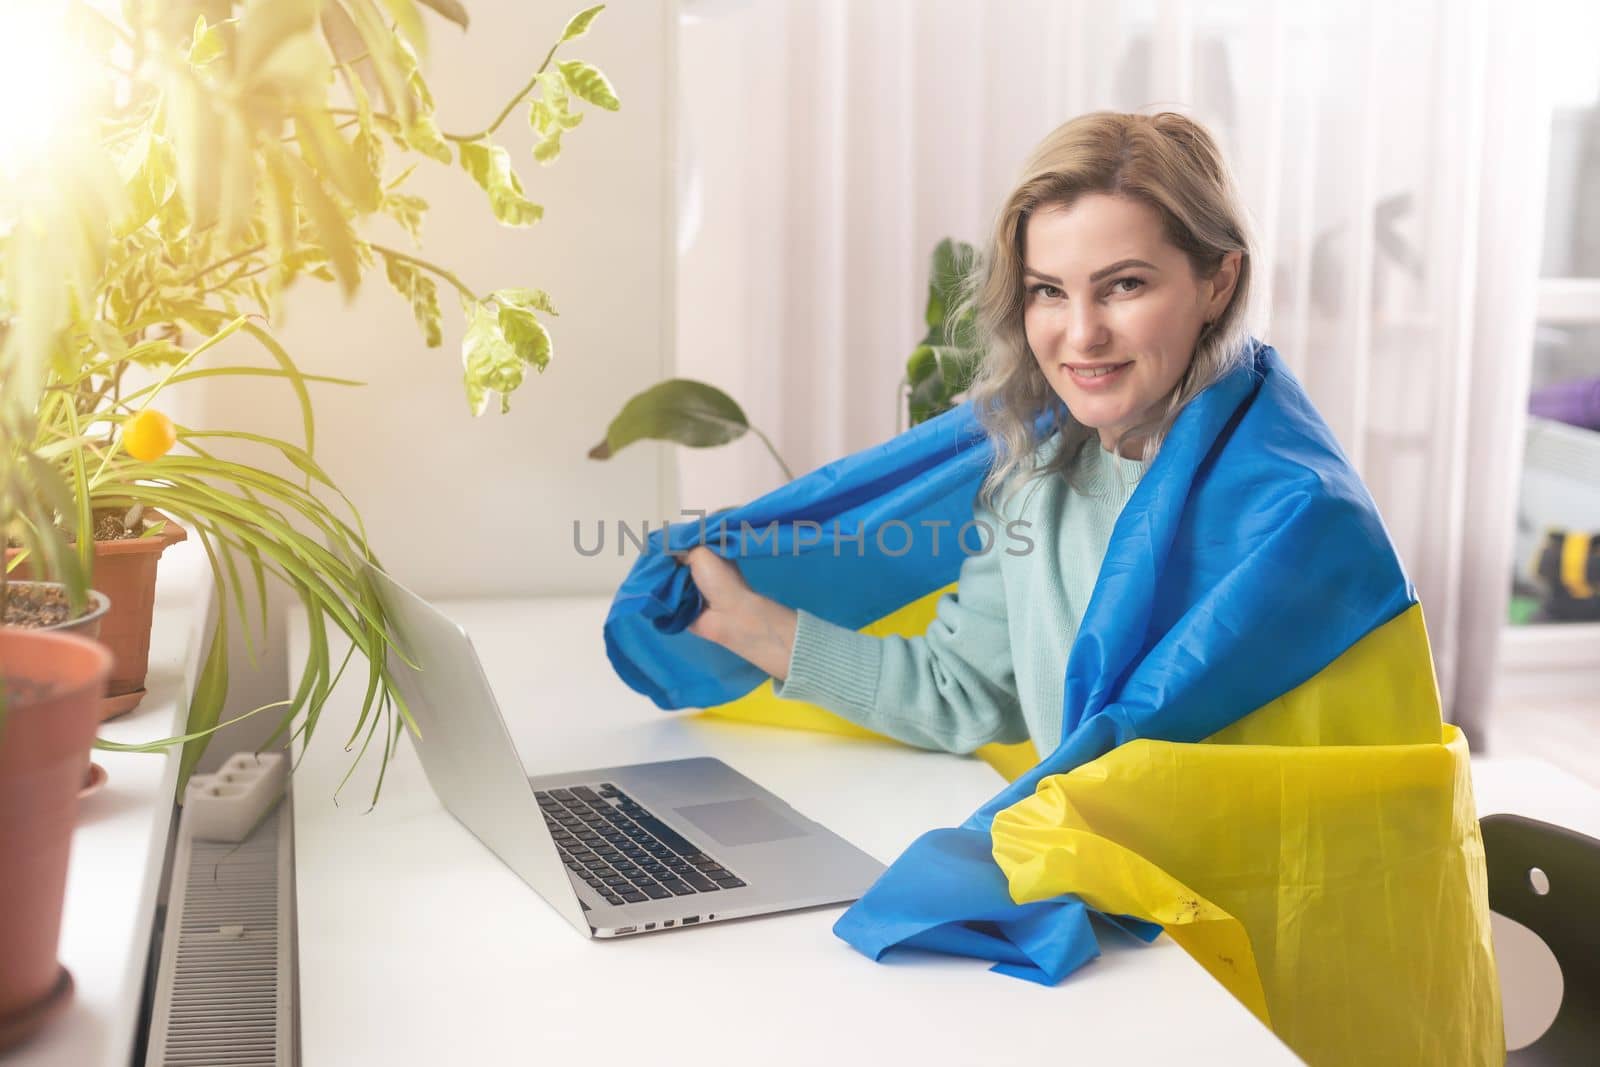 Ukrainian girl with the flag of Ukraine works on a laptop.